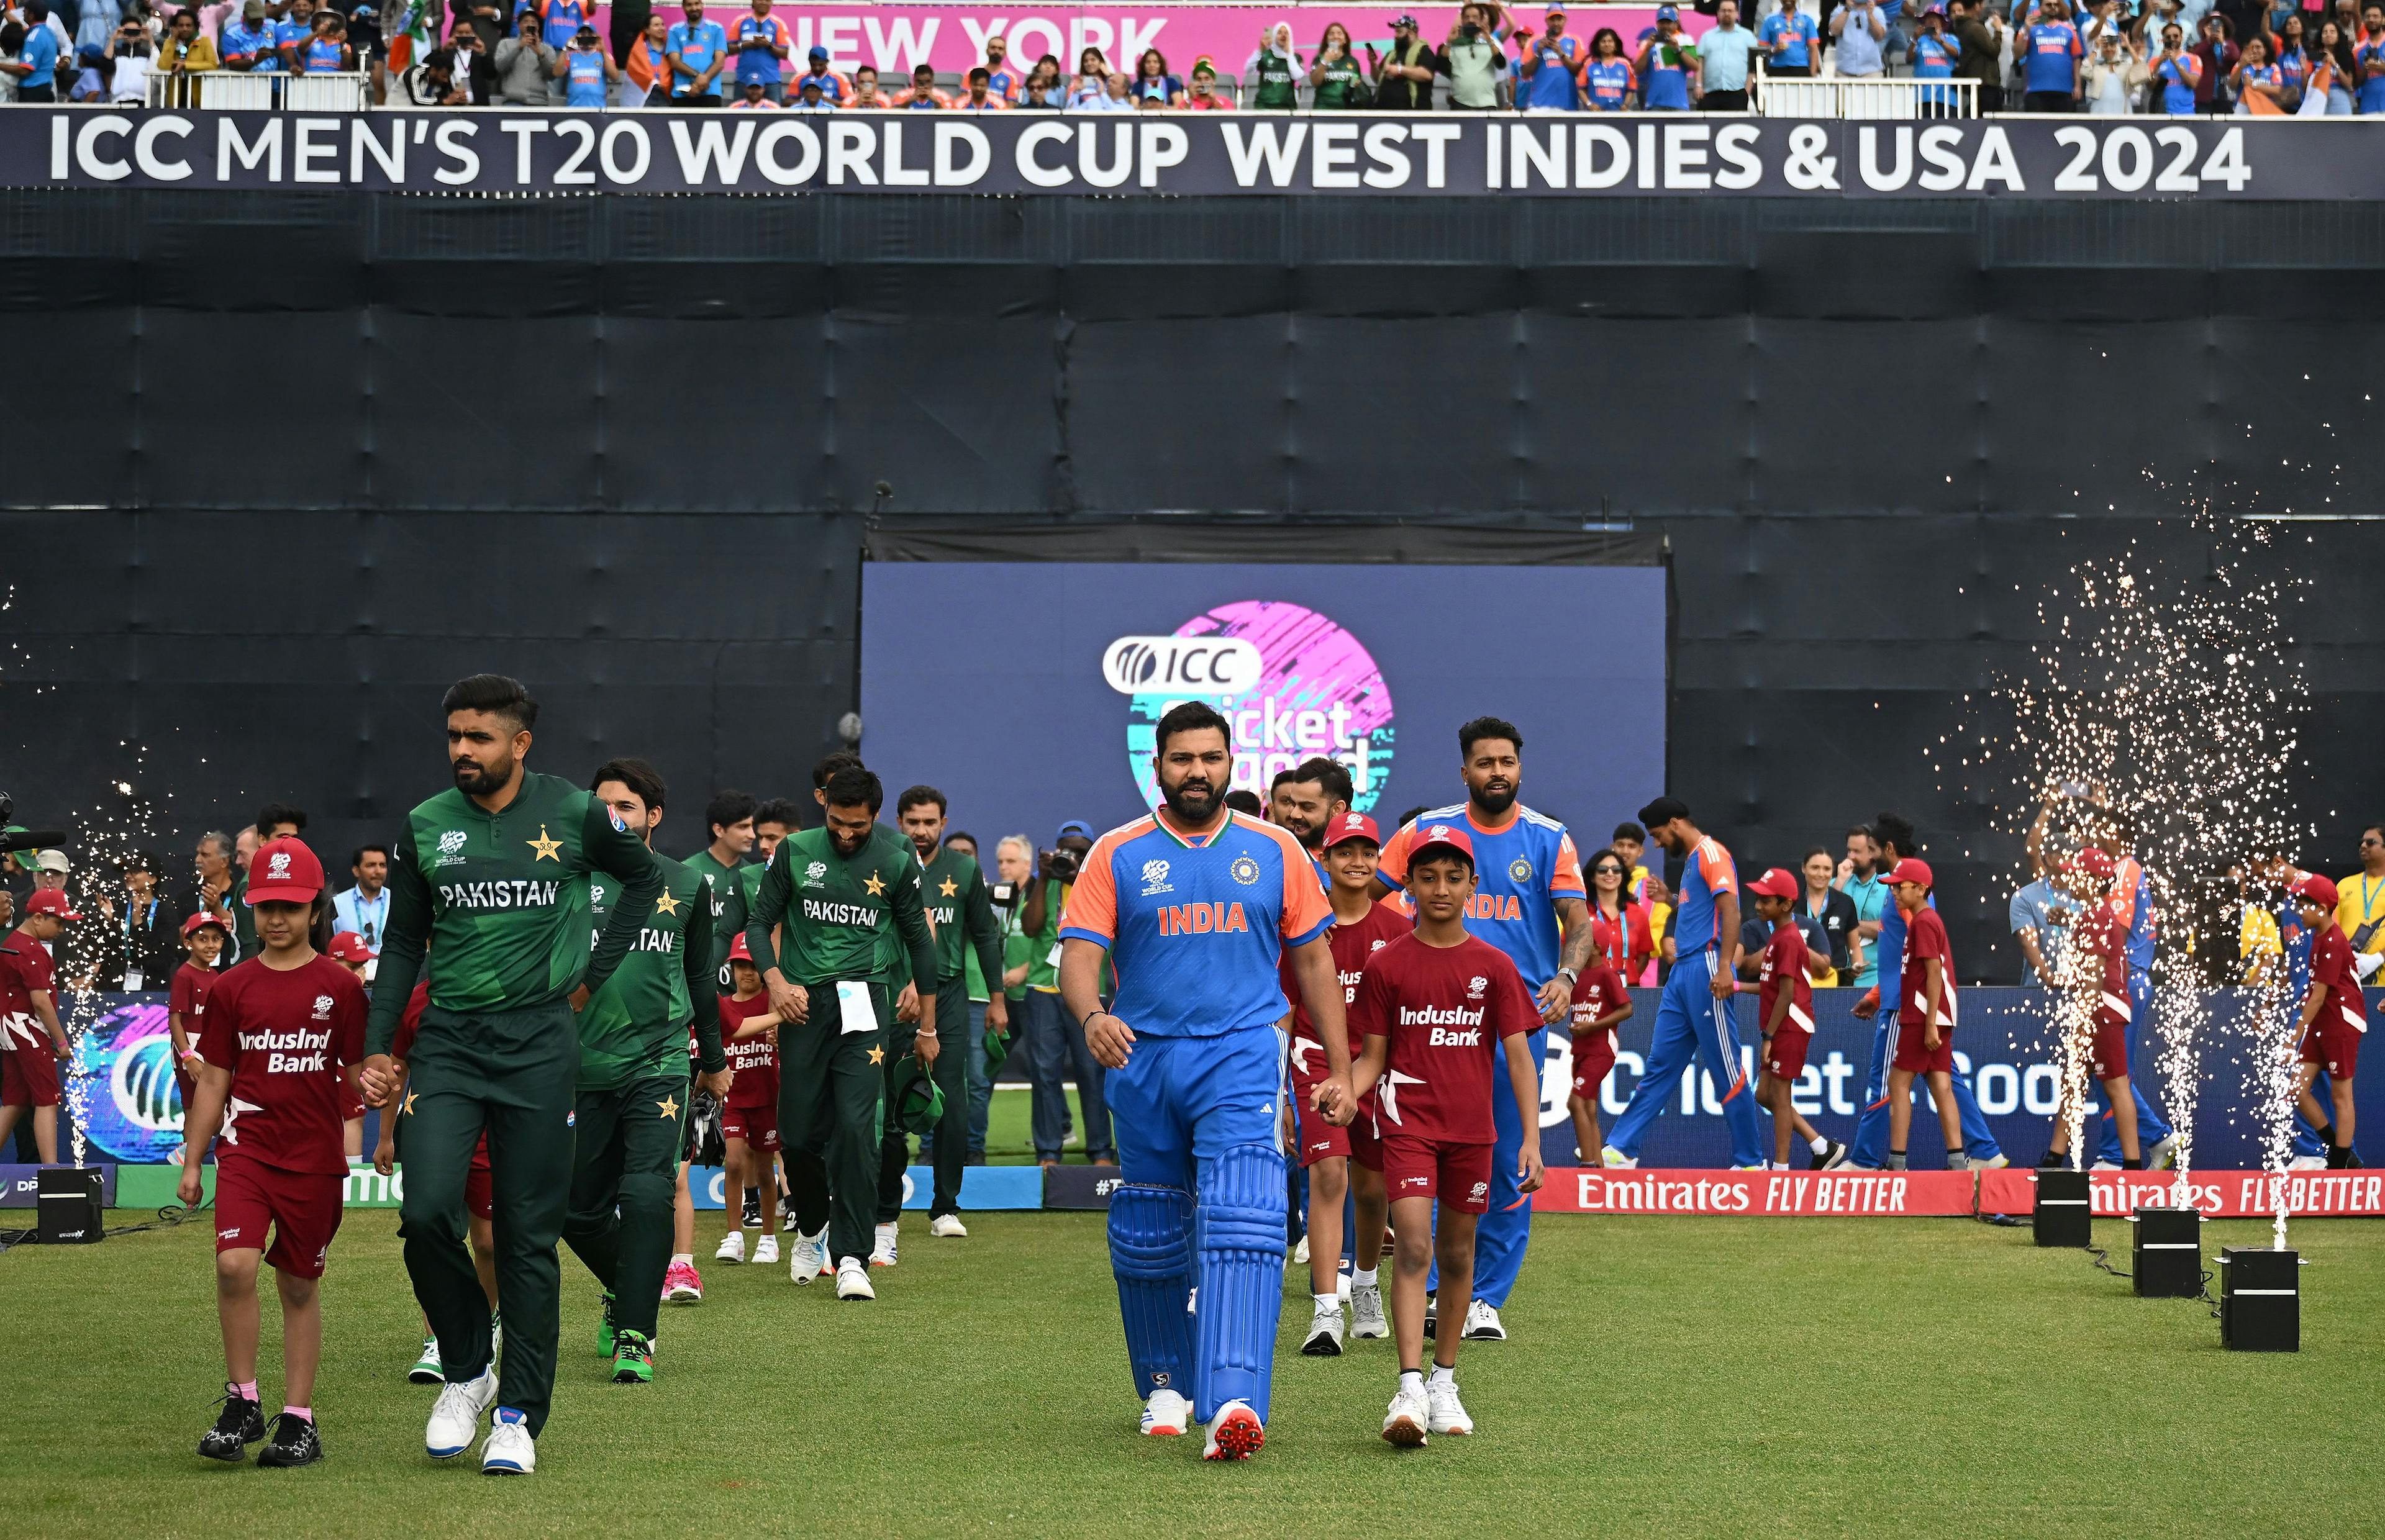  Babar Azam of Pakistan and Rohit Sharma of India take to the field during the ICC Men's T20 Cricket World Cup West Indies & USA 2024 match between India and Pakistan at Nassau County International Cricket Stadium 